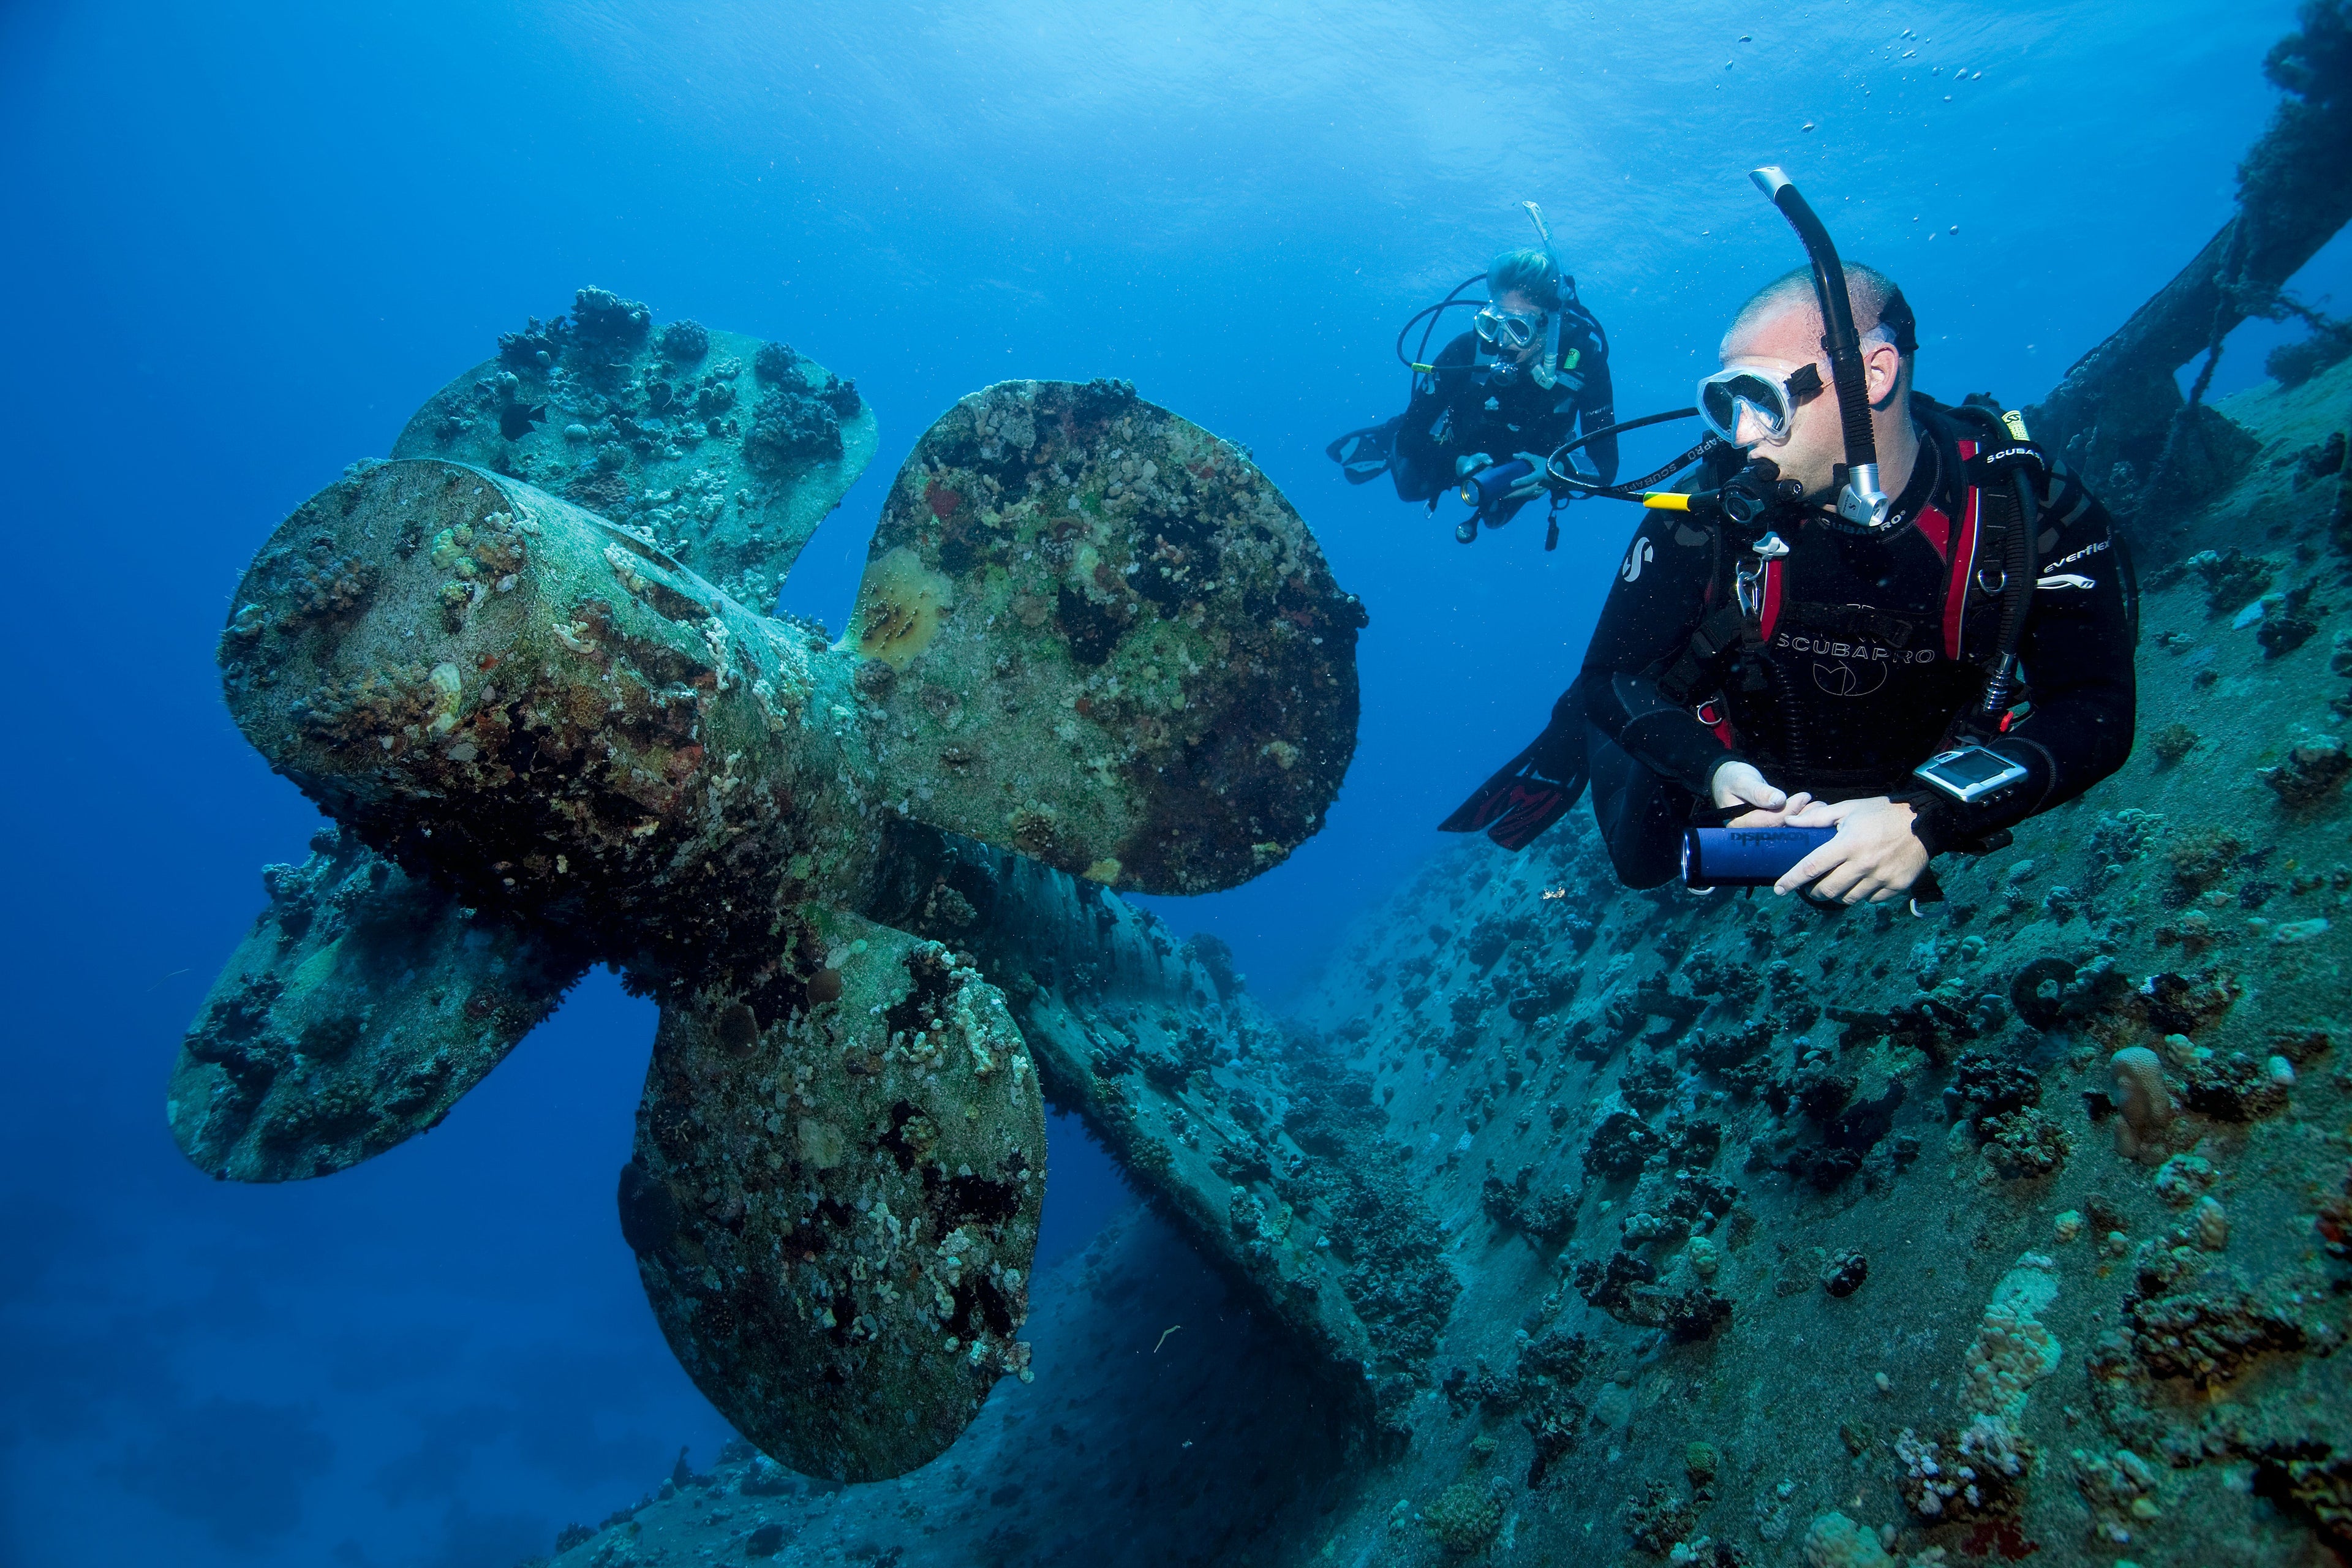 wreck diver swimming around wreck viewing ships propellor